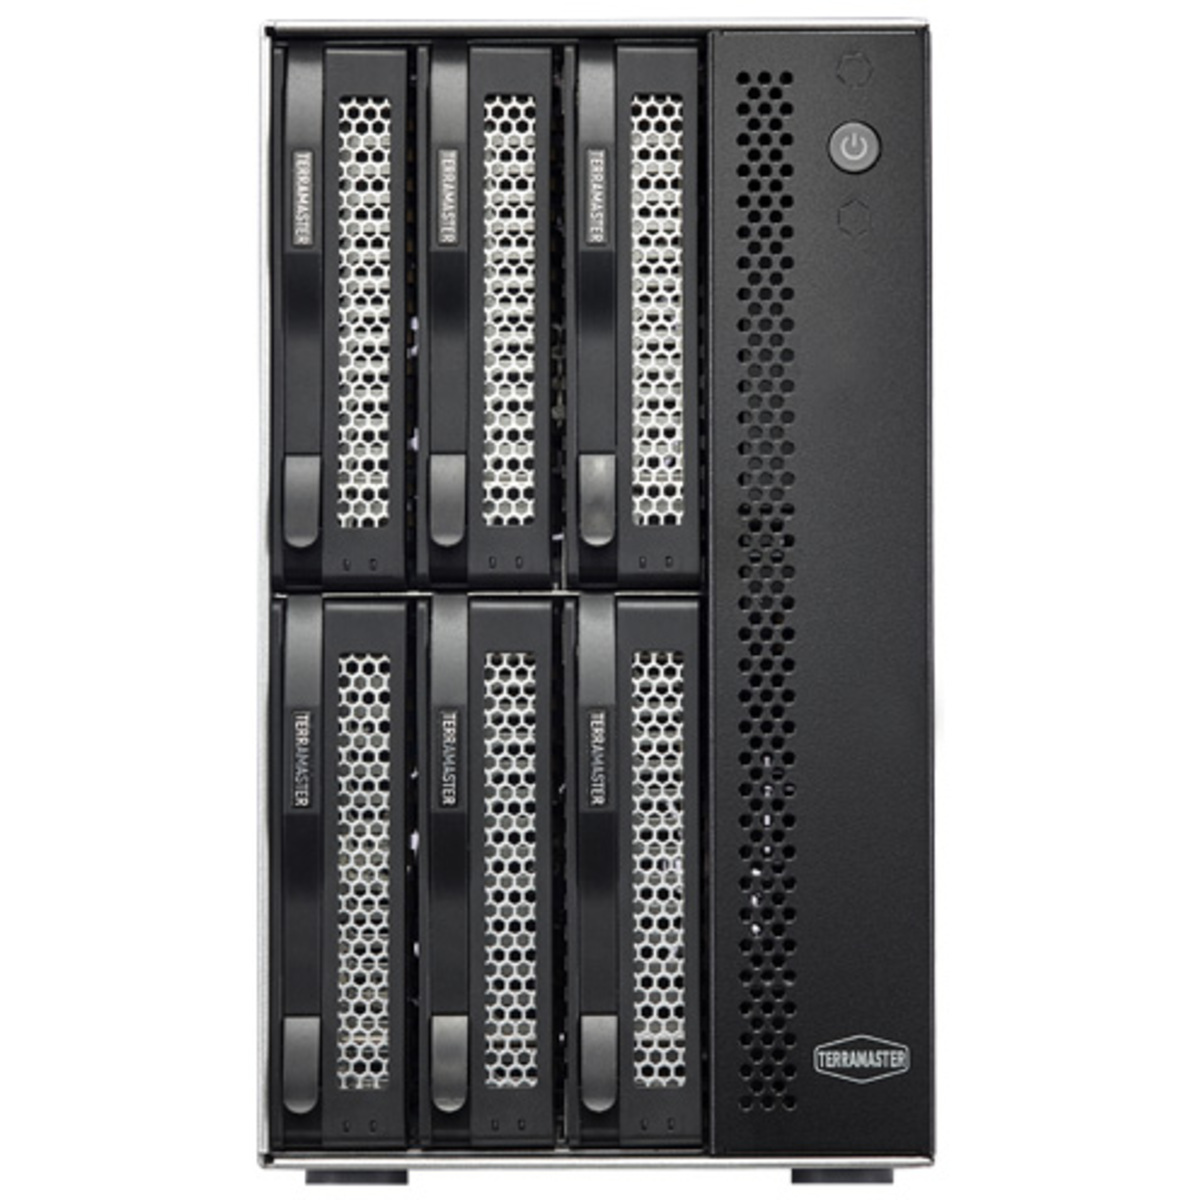 TerraMaster D6-320 12tb 6-Bay Desktop Multimedia / Power User / Business DAS - Direct Attached Storage Device 6x2tb Sandisk Ultra 3D SDSSDH3-2T00 2.5 560/520MB/s SATA 6Gb/s SSD CONSUMER Class Drives Installed - Burn-In Tested D6-320